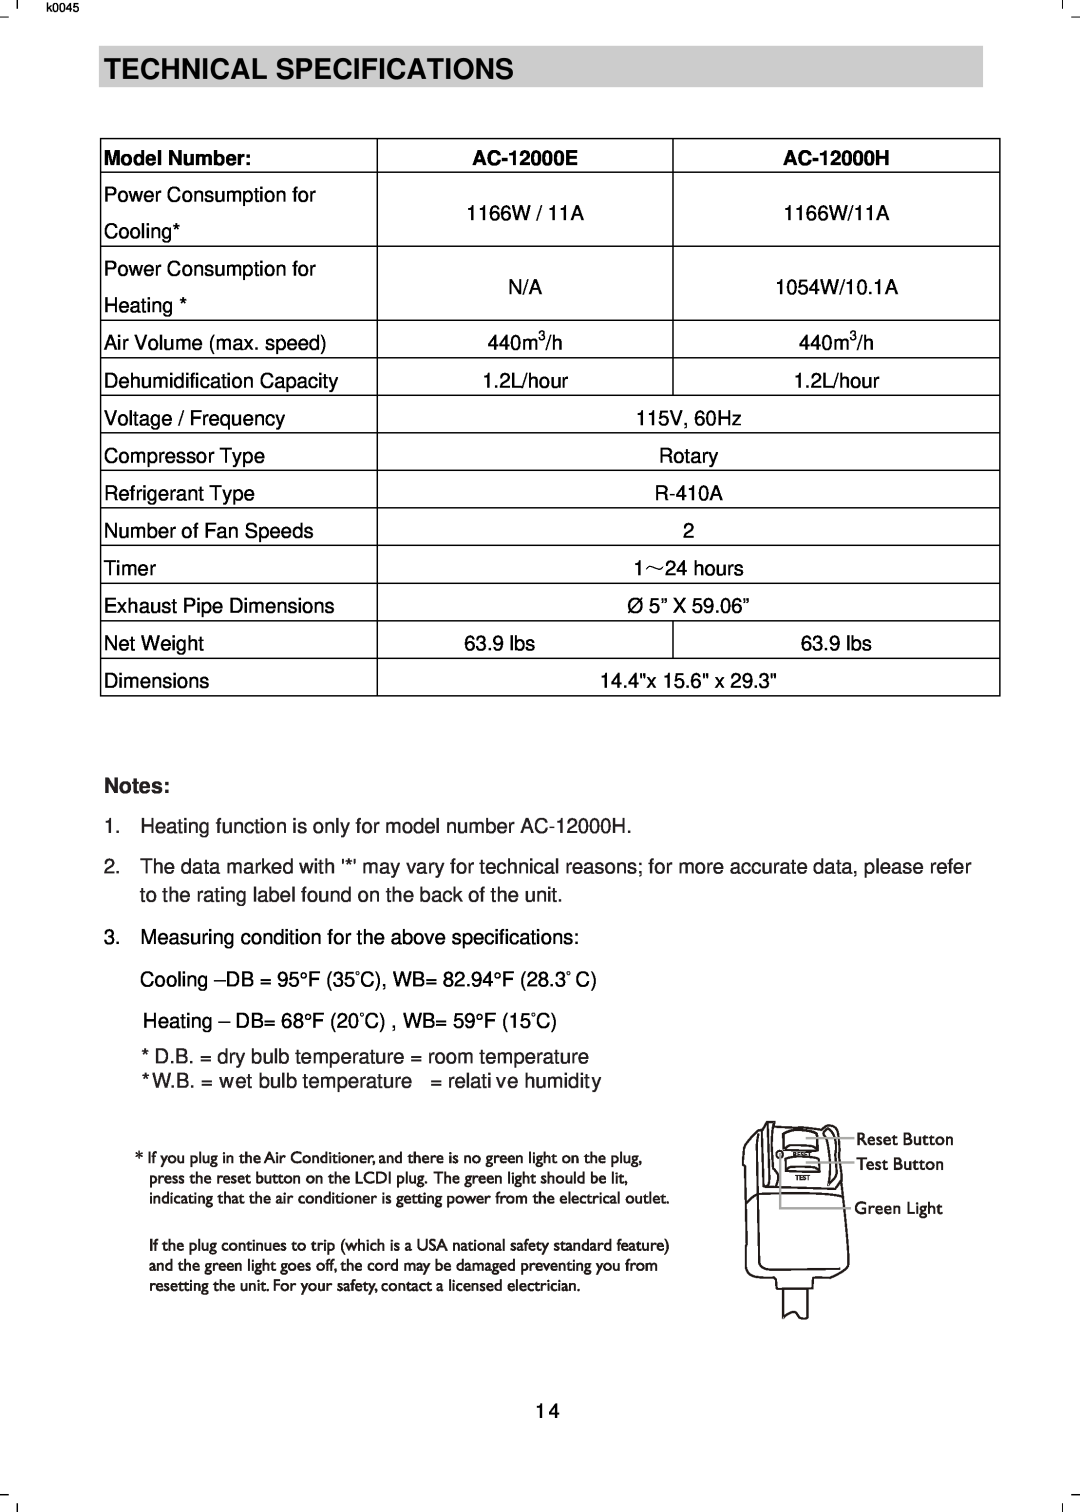 NewAir AC 12000E manual Technical Specifications, Model Number, AC-12000E, AC-12000H 